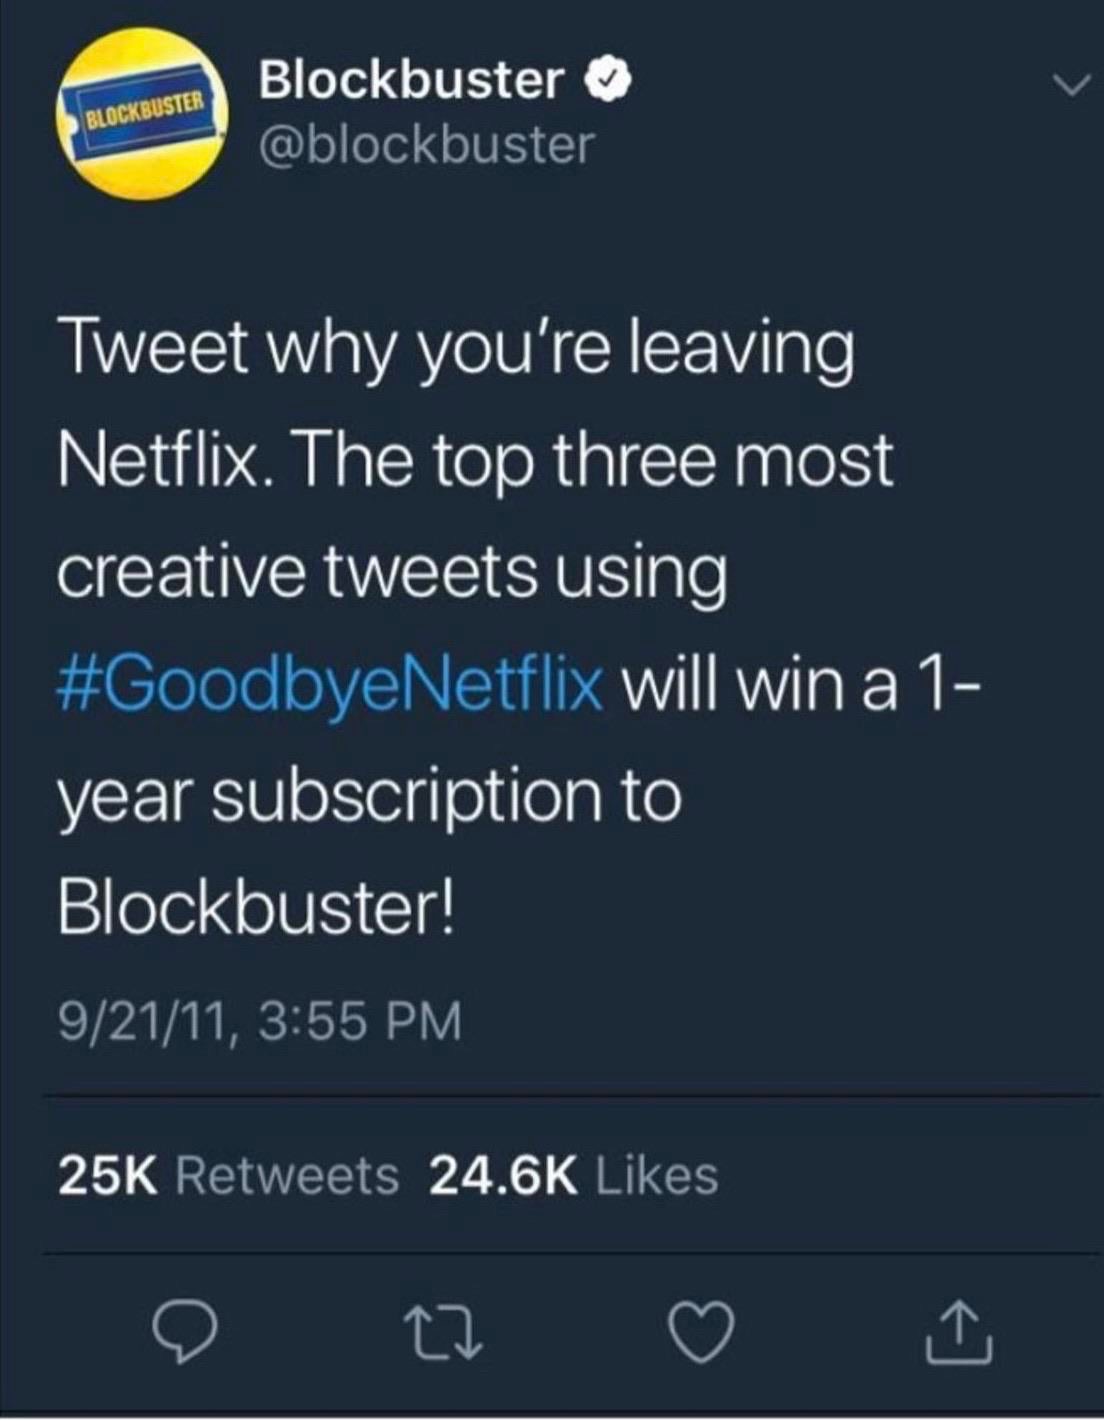 screenshot - Blockbuster Blockbuster Tweet why you're leaving Netflix. The top three most creative tweets using will win a 1 year subscription to Blockbuster! 92111, 25K